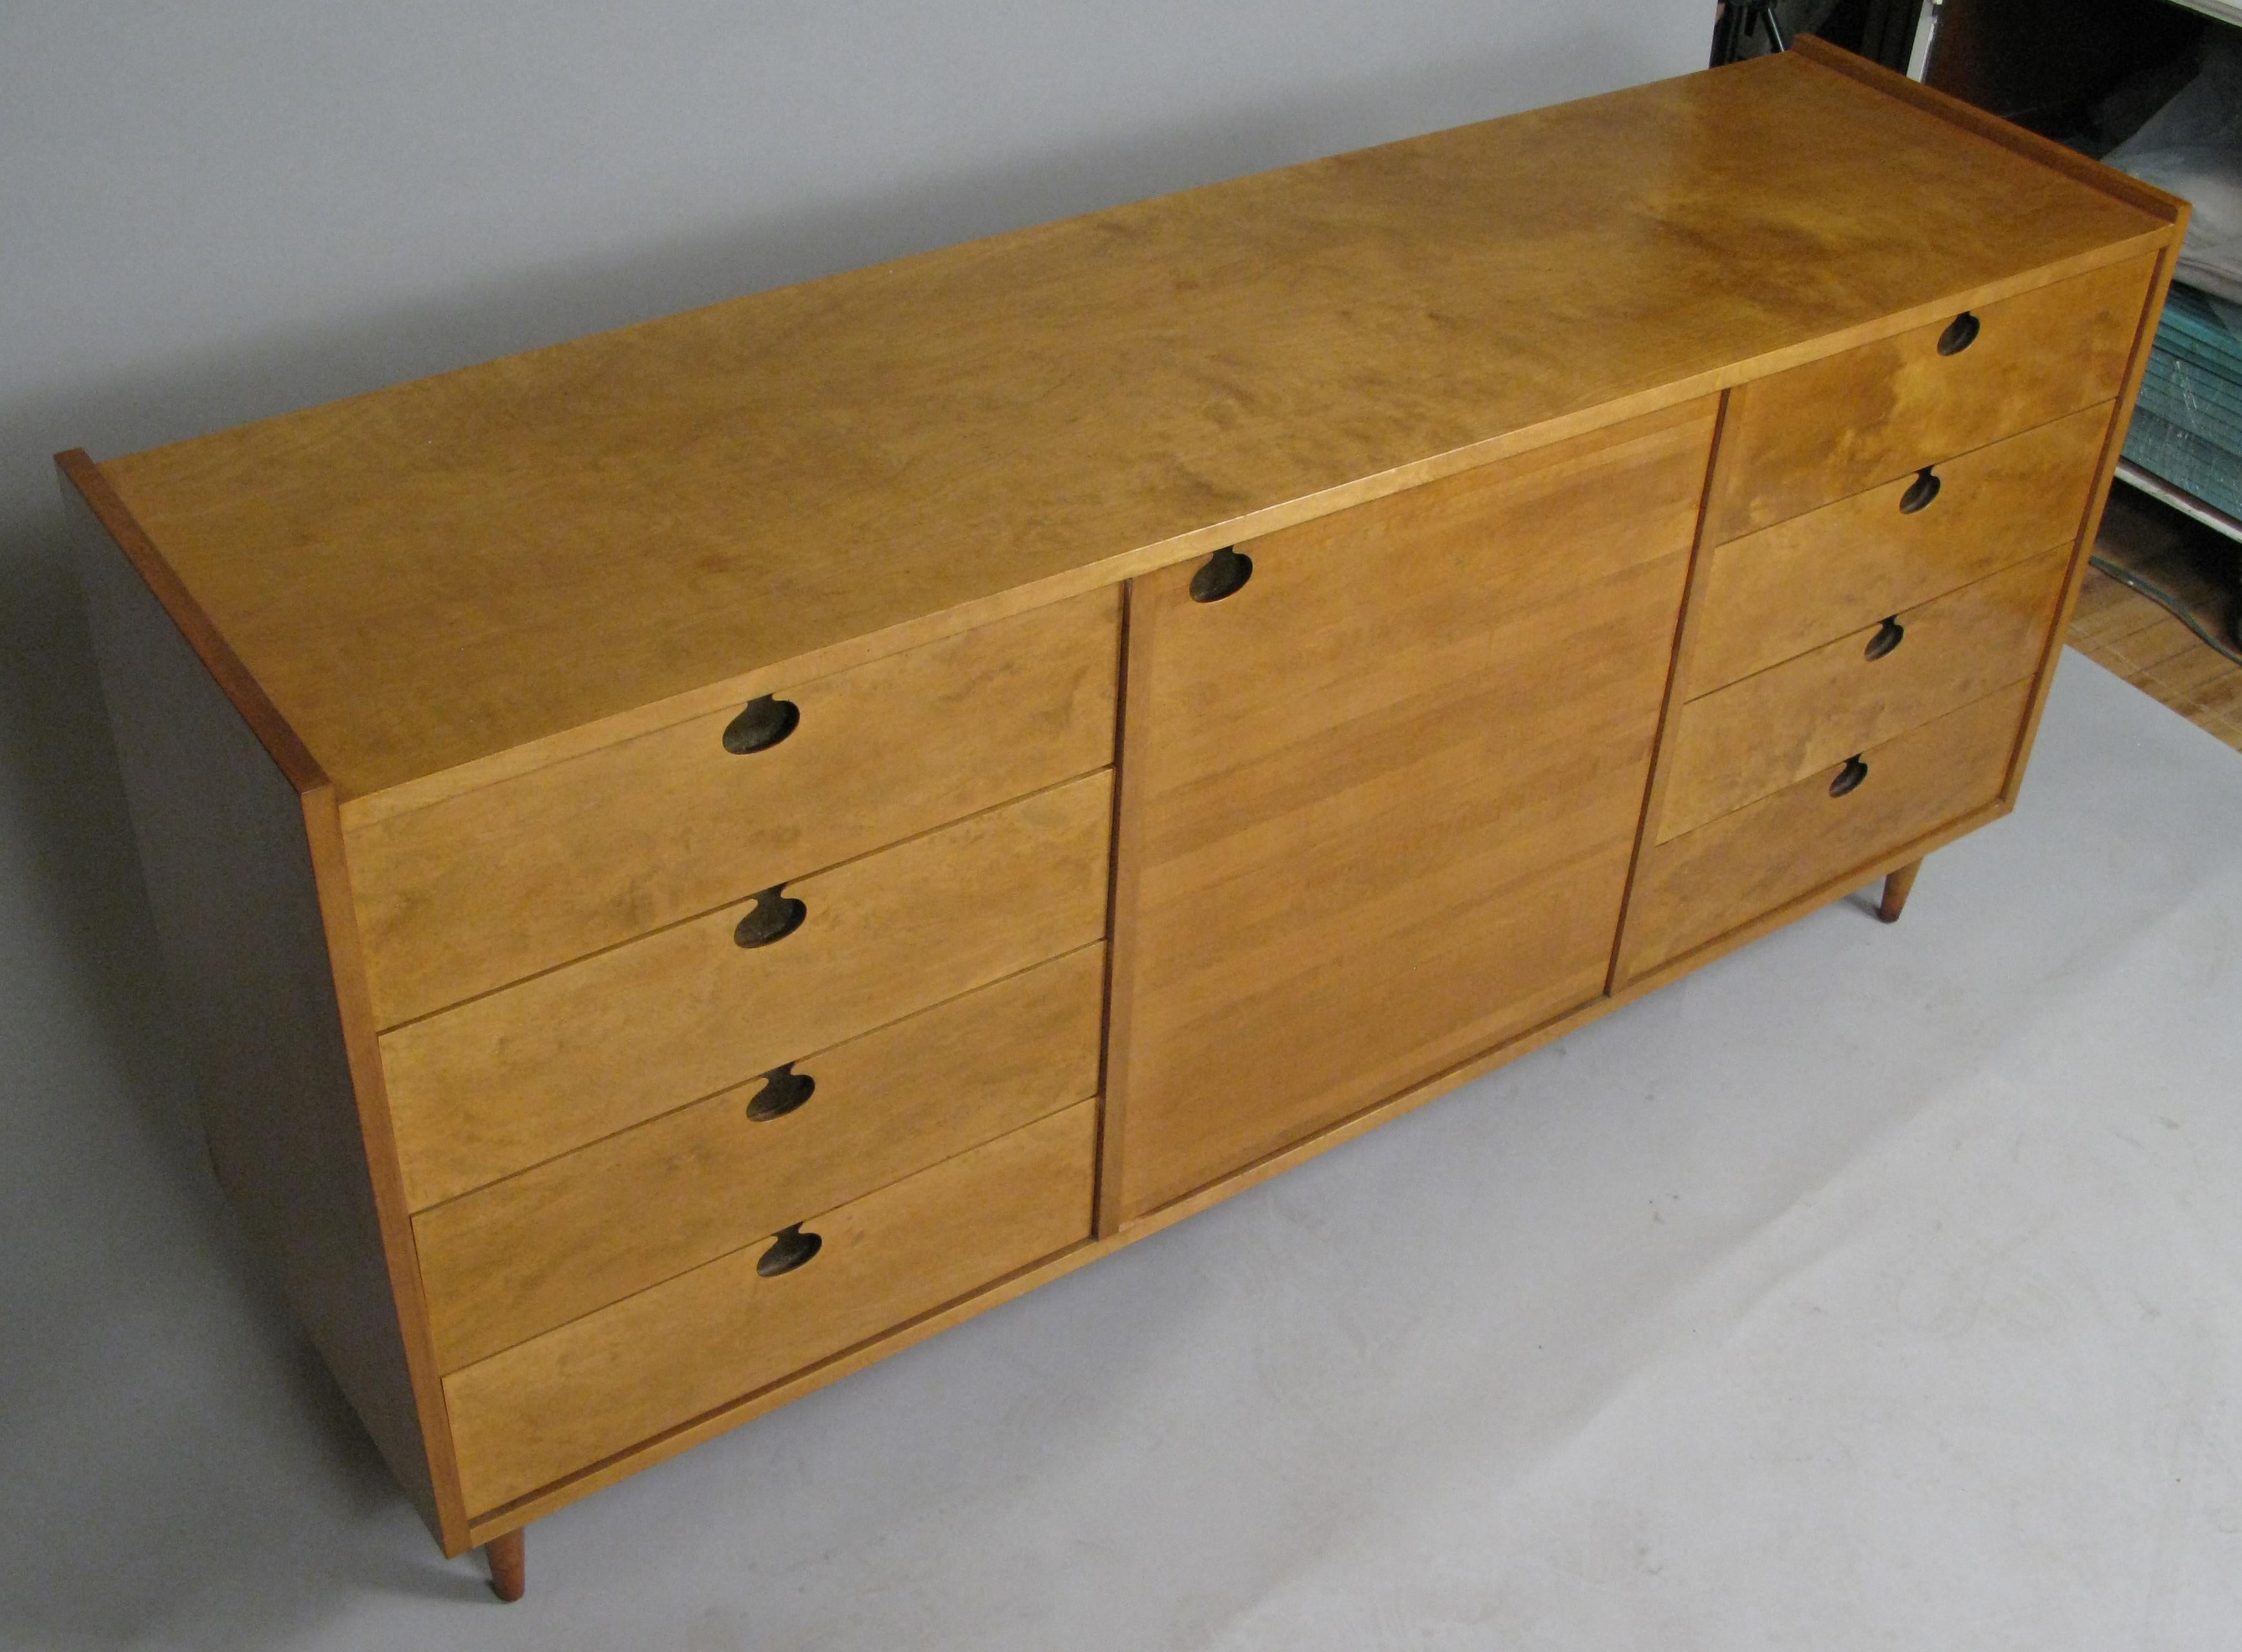 This 1950s Swedish maple sideboard / chest by Edmond Spence is composed of eight drawers (four on each side) divided by a centre storage section with two shelves. Each cabinet pull is inset brass, and the piece is supported by four two-tone maple,